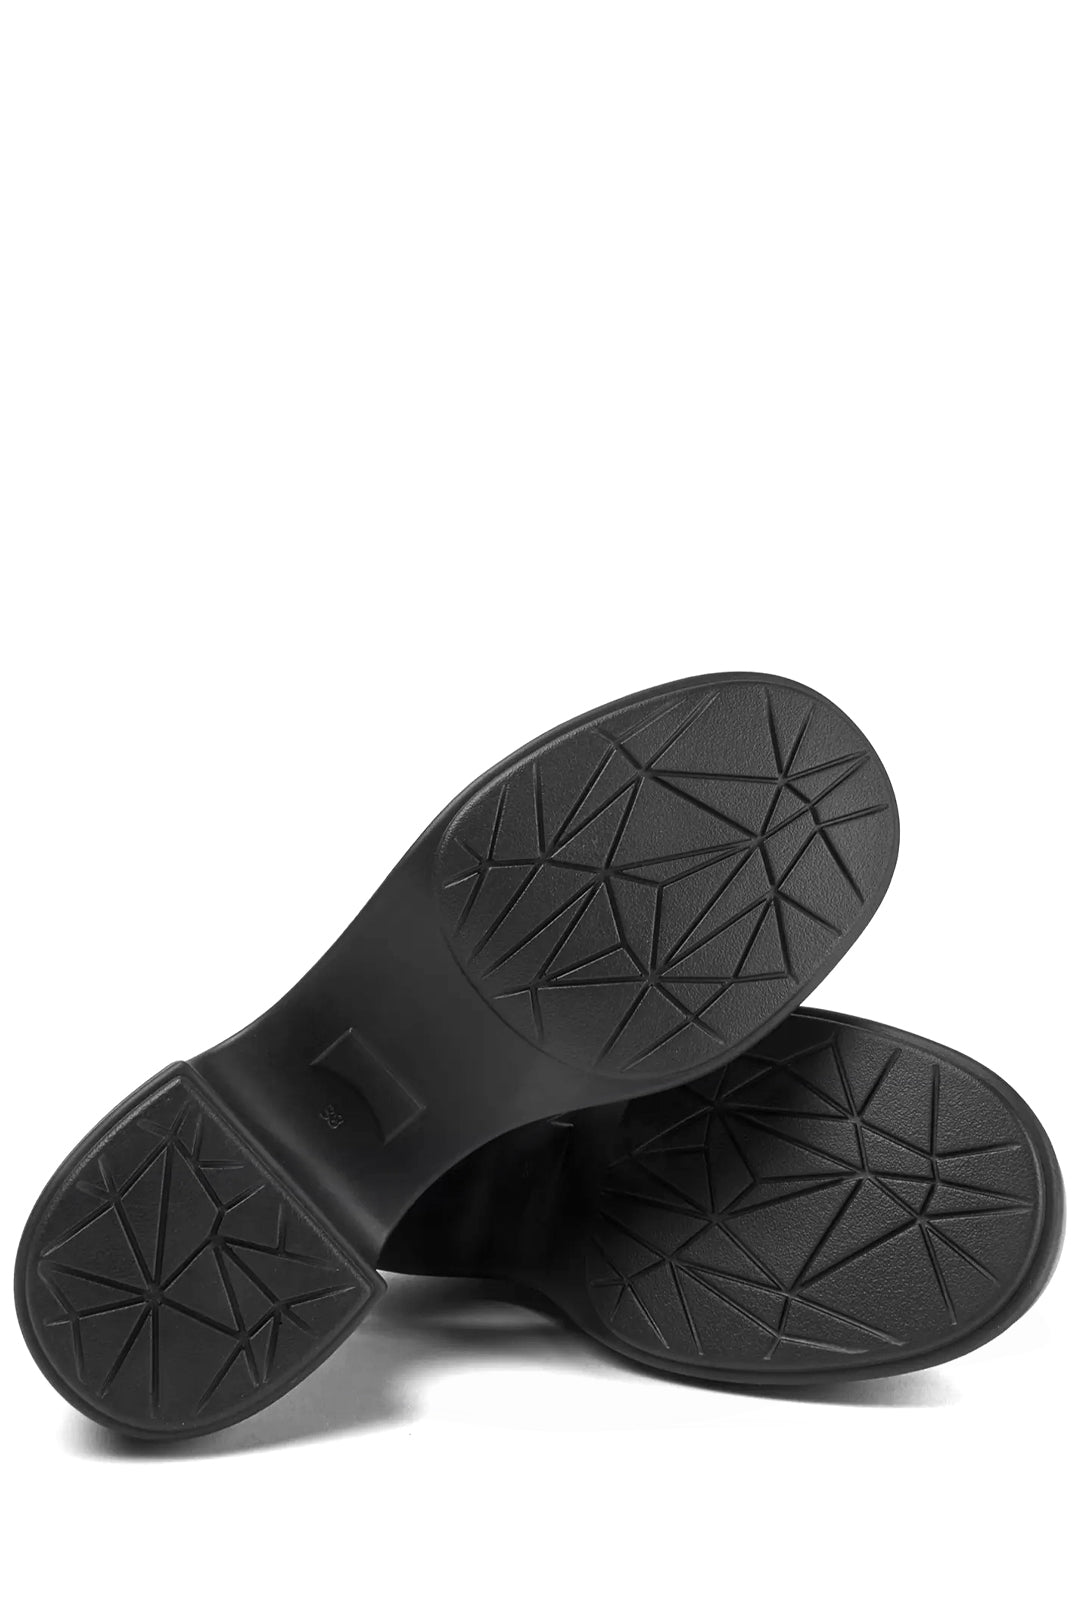 Camper Thelma Loafers, Black